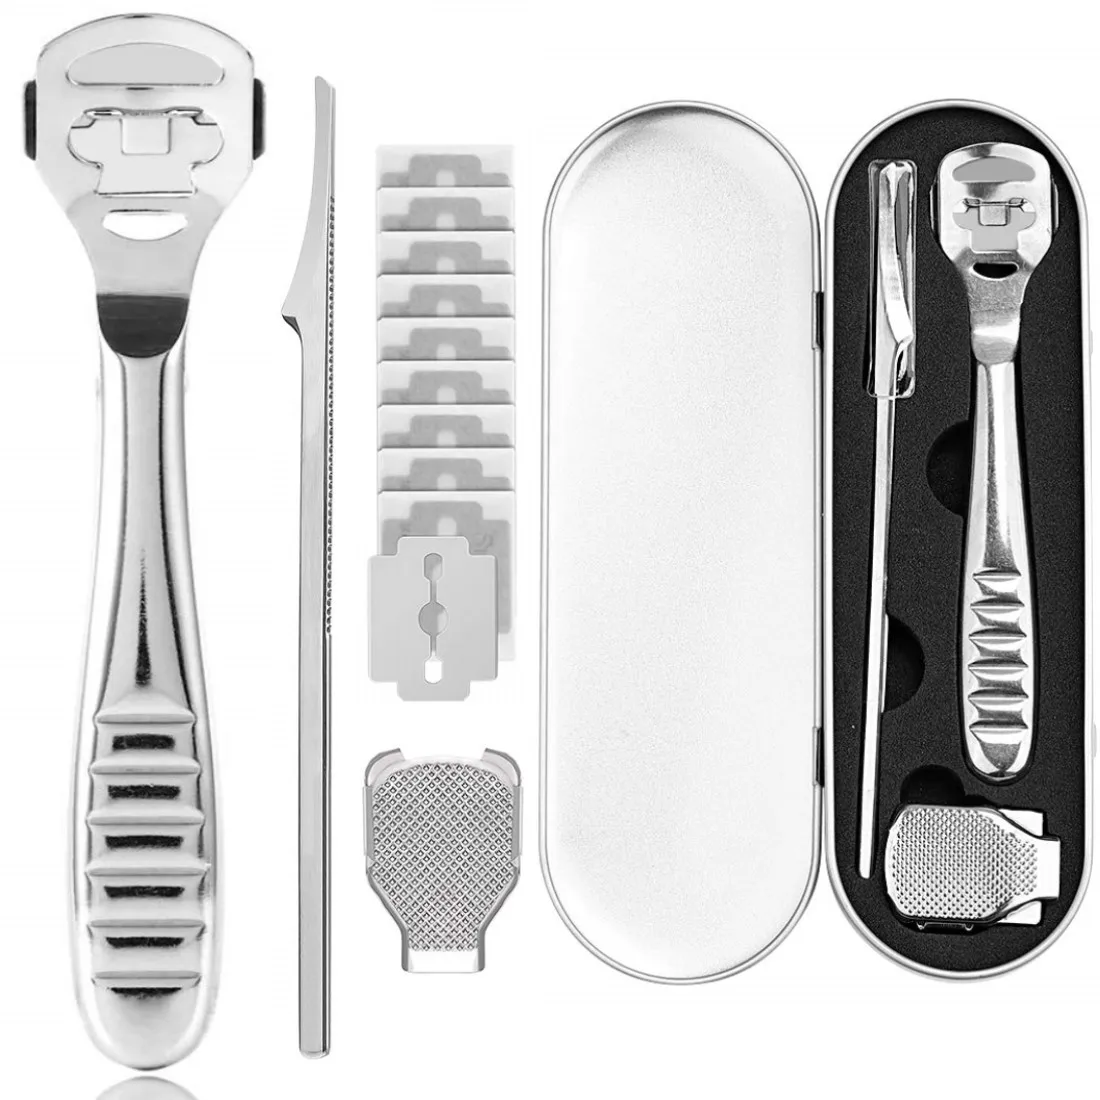 

Stainless Steel Pedicure Tool Set Foot Care Callus Remover Hard Dead Skin Cutter Shaver pedicure knife+ blade Set